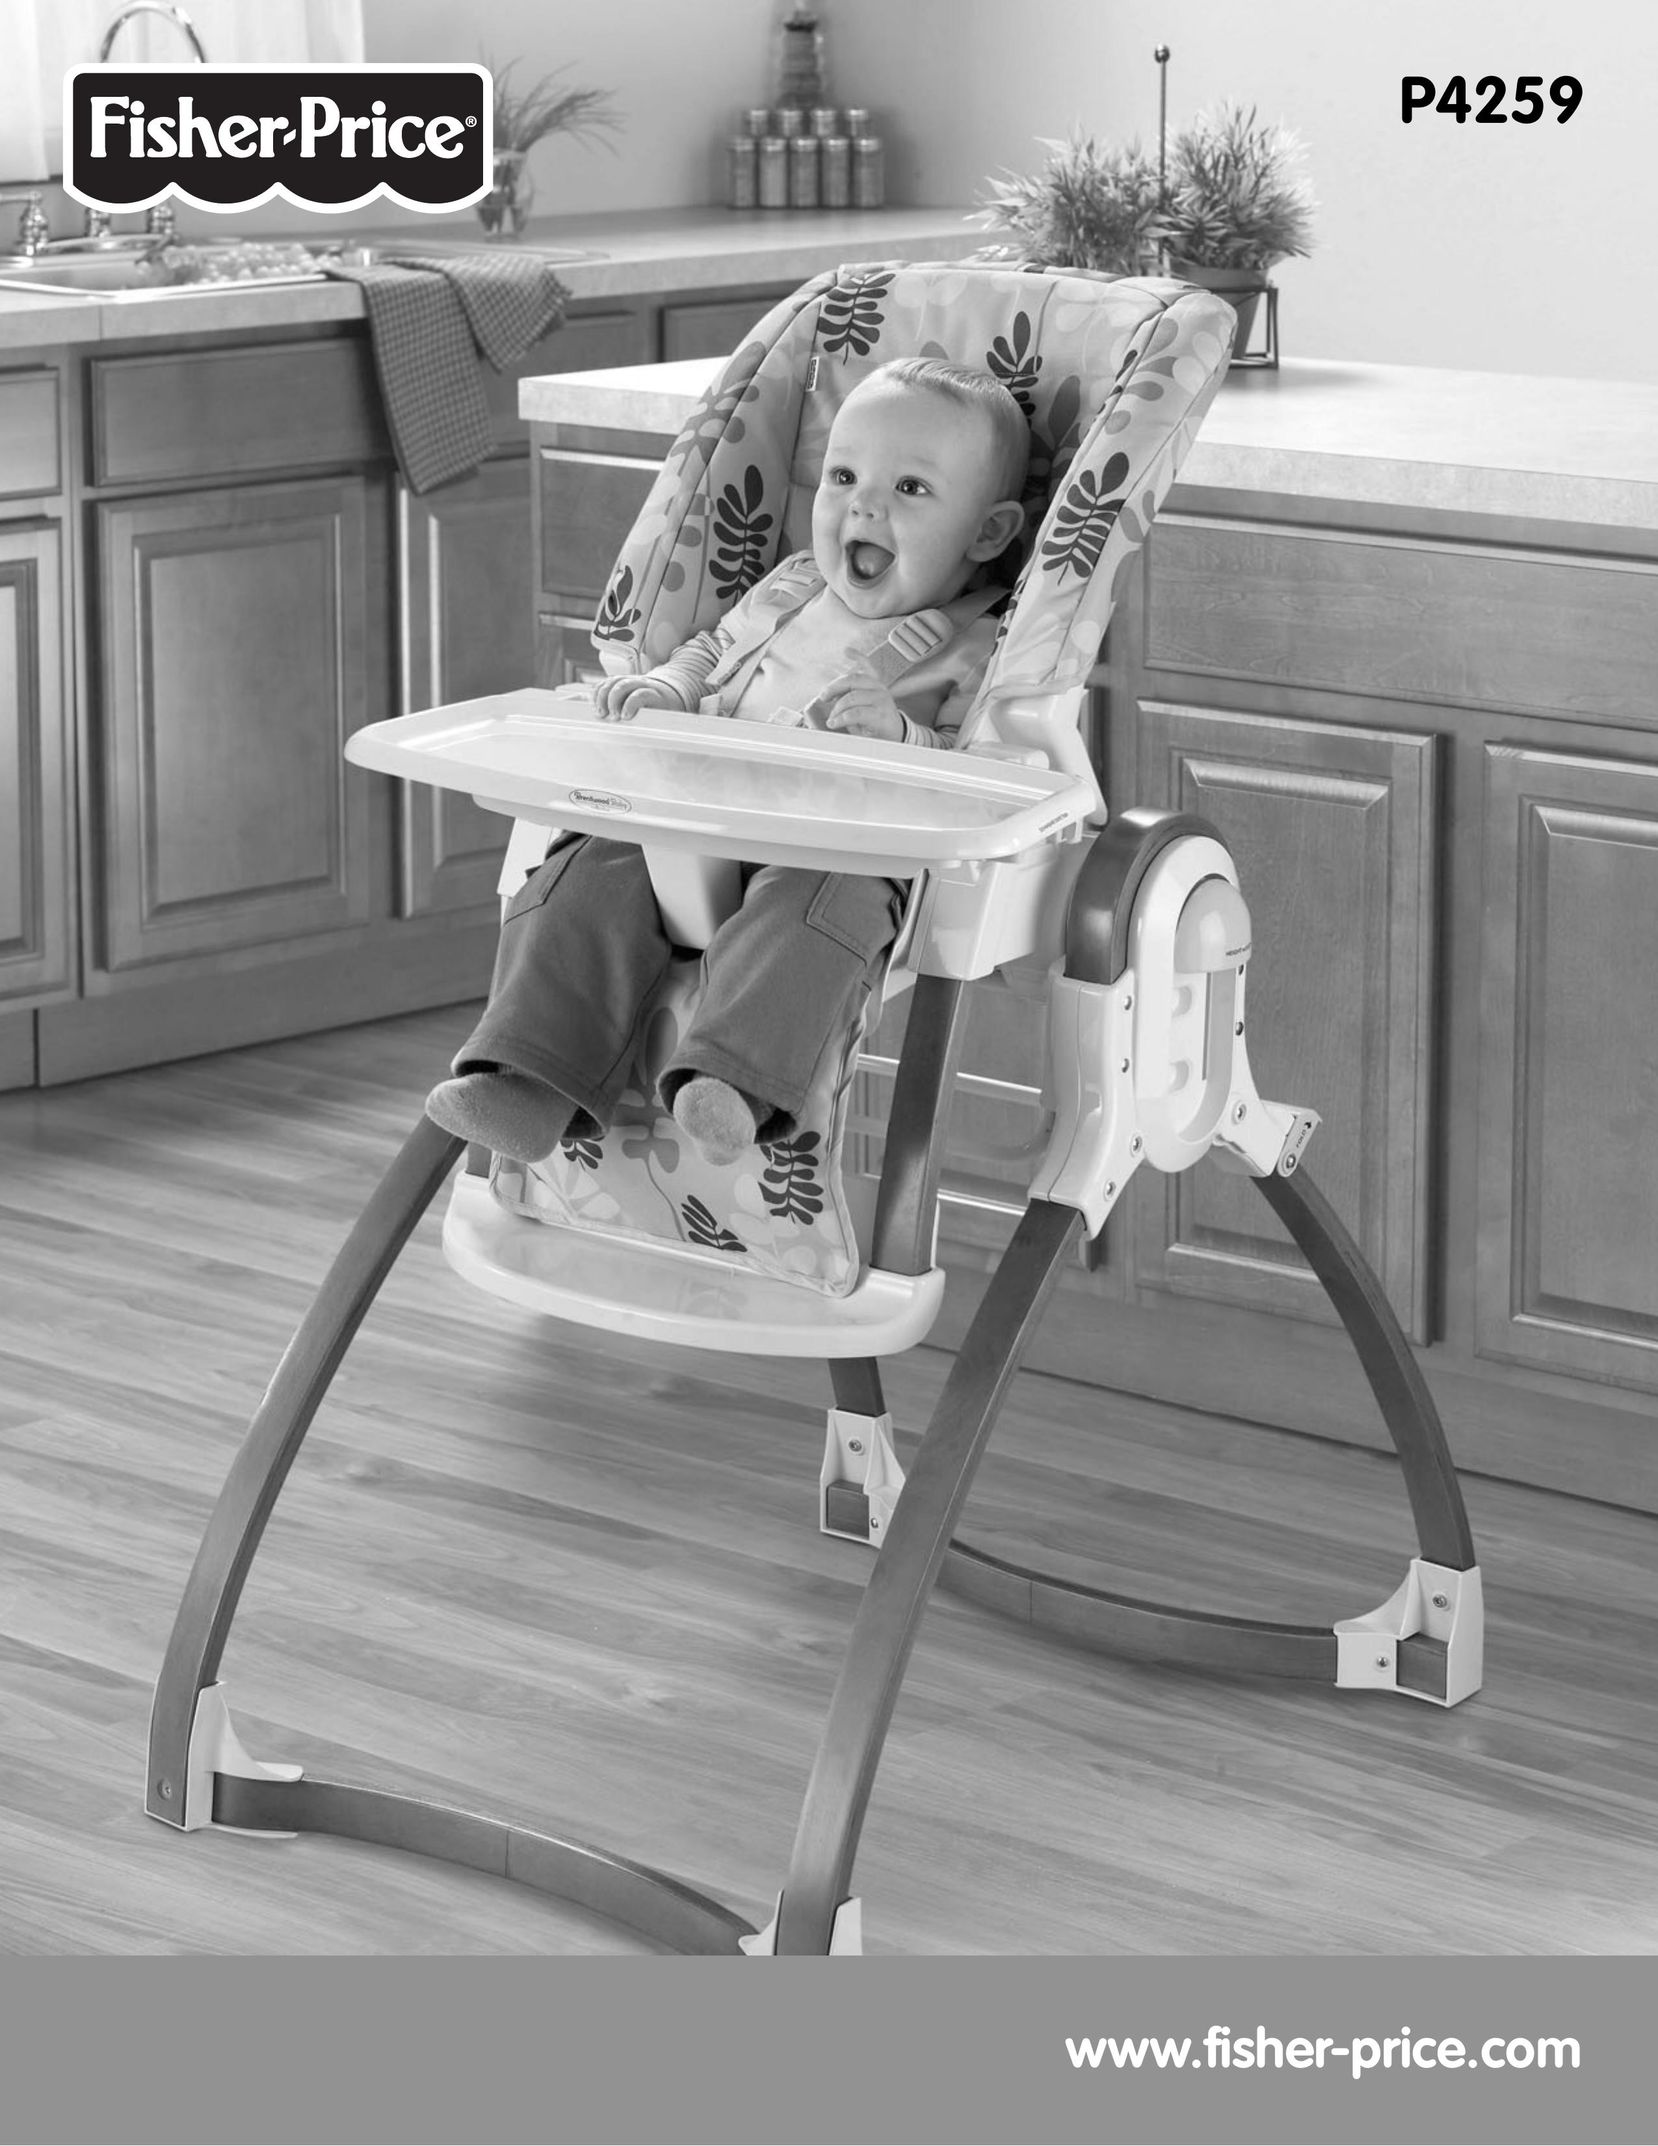 Fisher-Price P4259 High Chair User Manual